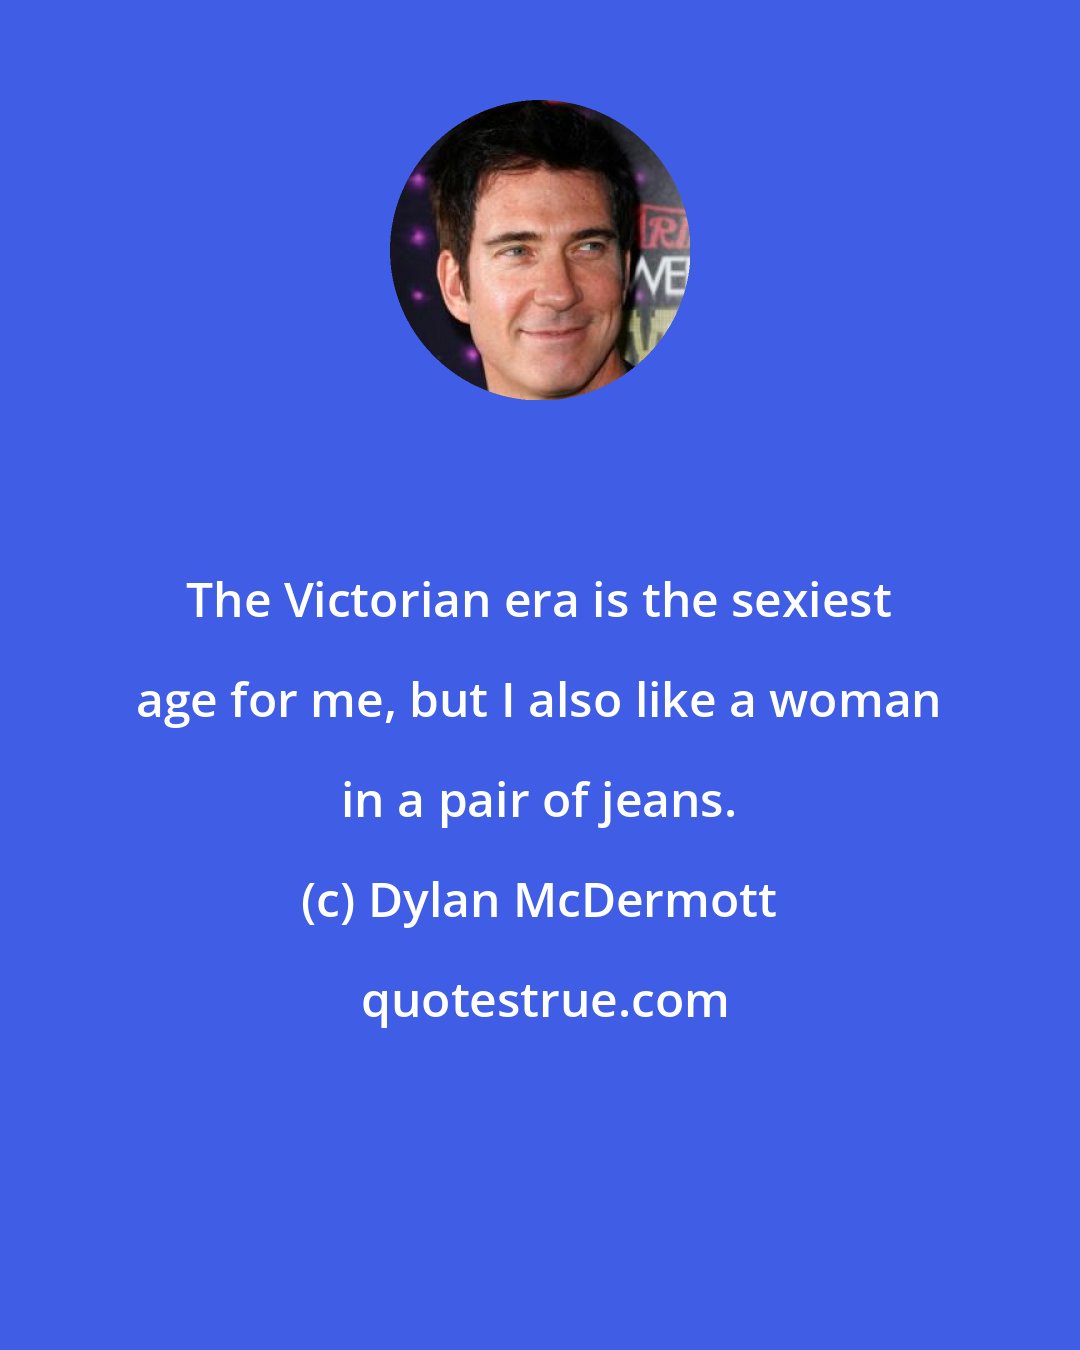 Dylan McDermott: The Victorian era is the sexiest age for me, but I also like a woman in a pair of jeans.